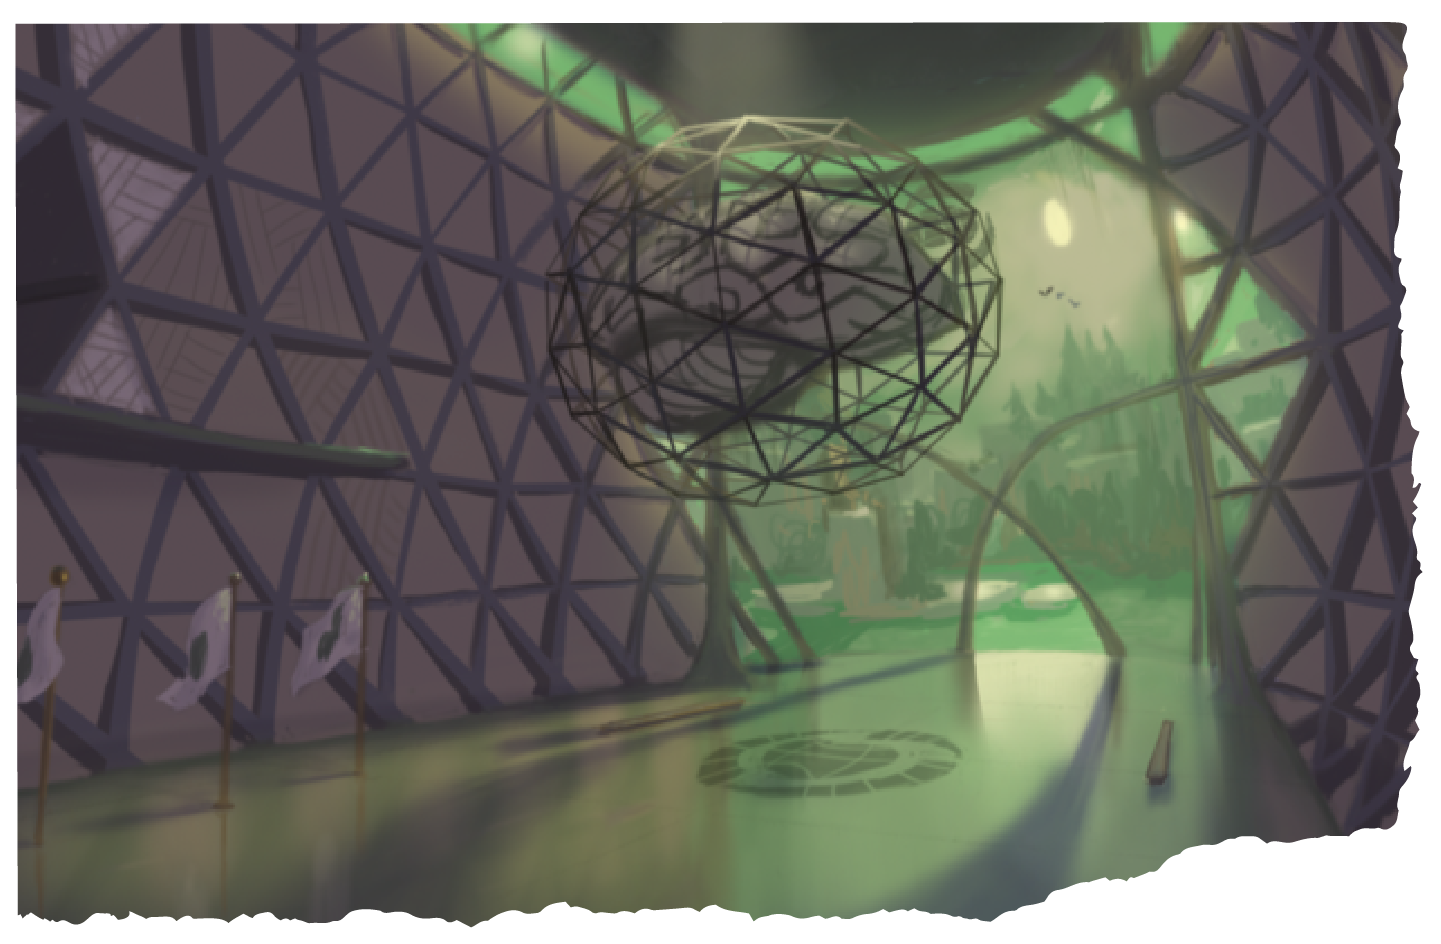 <b class="accent">FIG. 2 — </b> Early concept art by Nathan 'Bagel' Stapley and Peter Chan from the Psychonauts 2 creative team, provided to Lettermatic as inspiration.